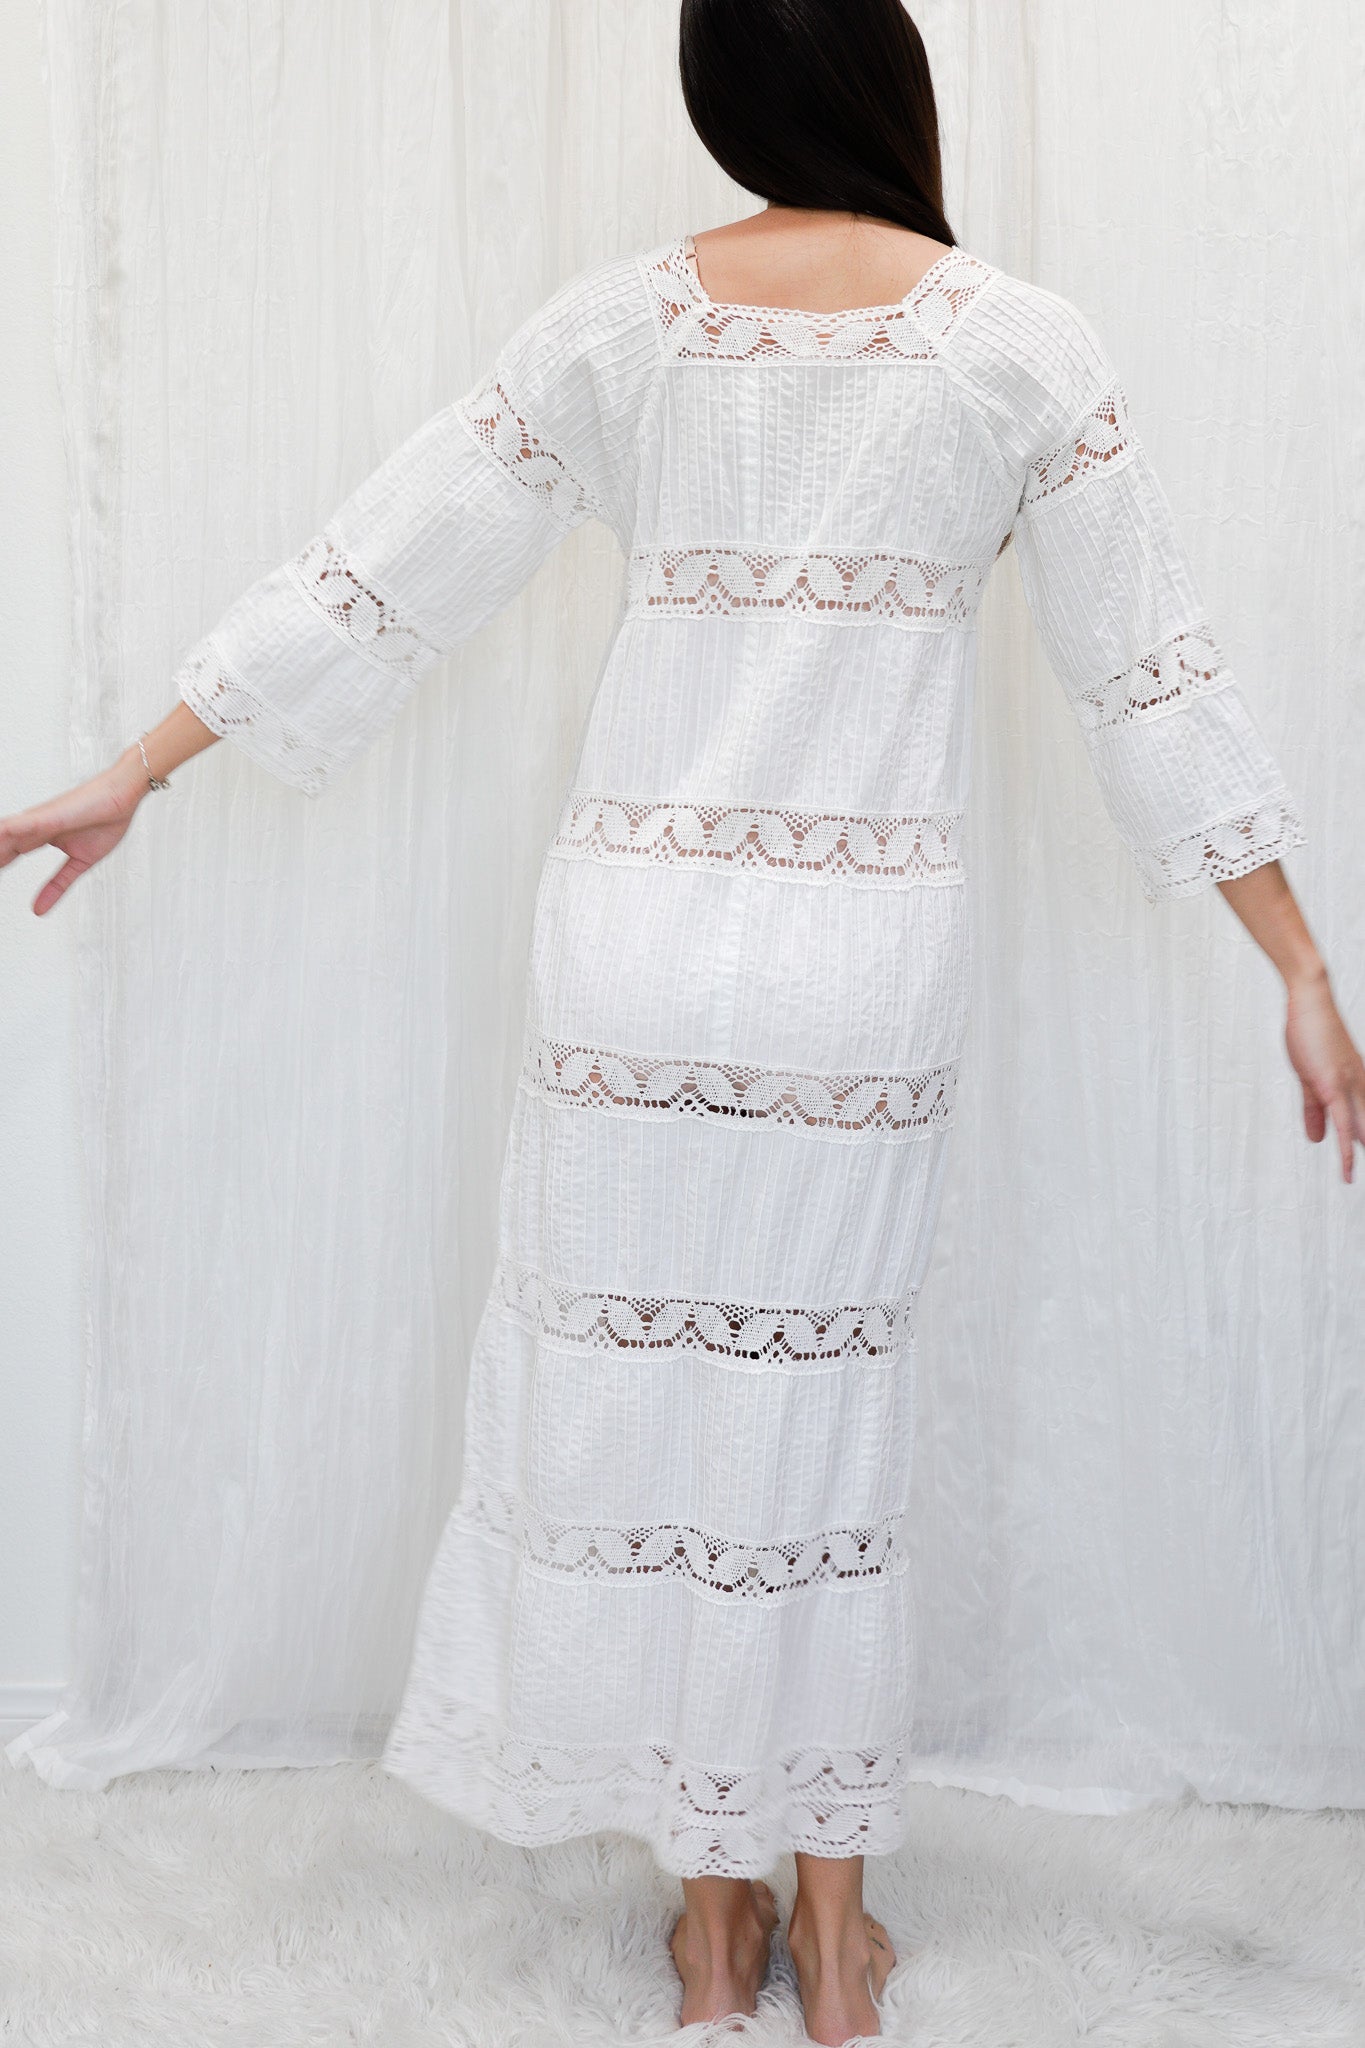 VINTAGE 1960-1970s Pin-Tucked Cotton Lace Mexican Dress